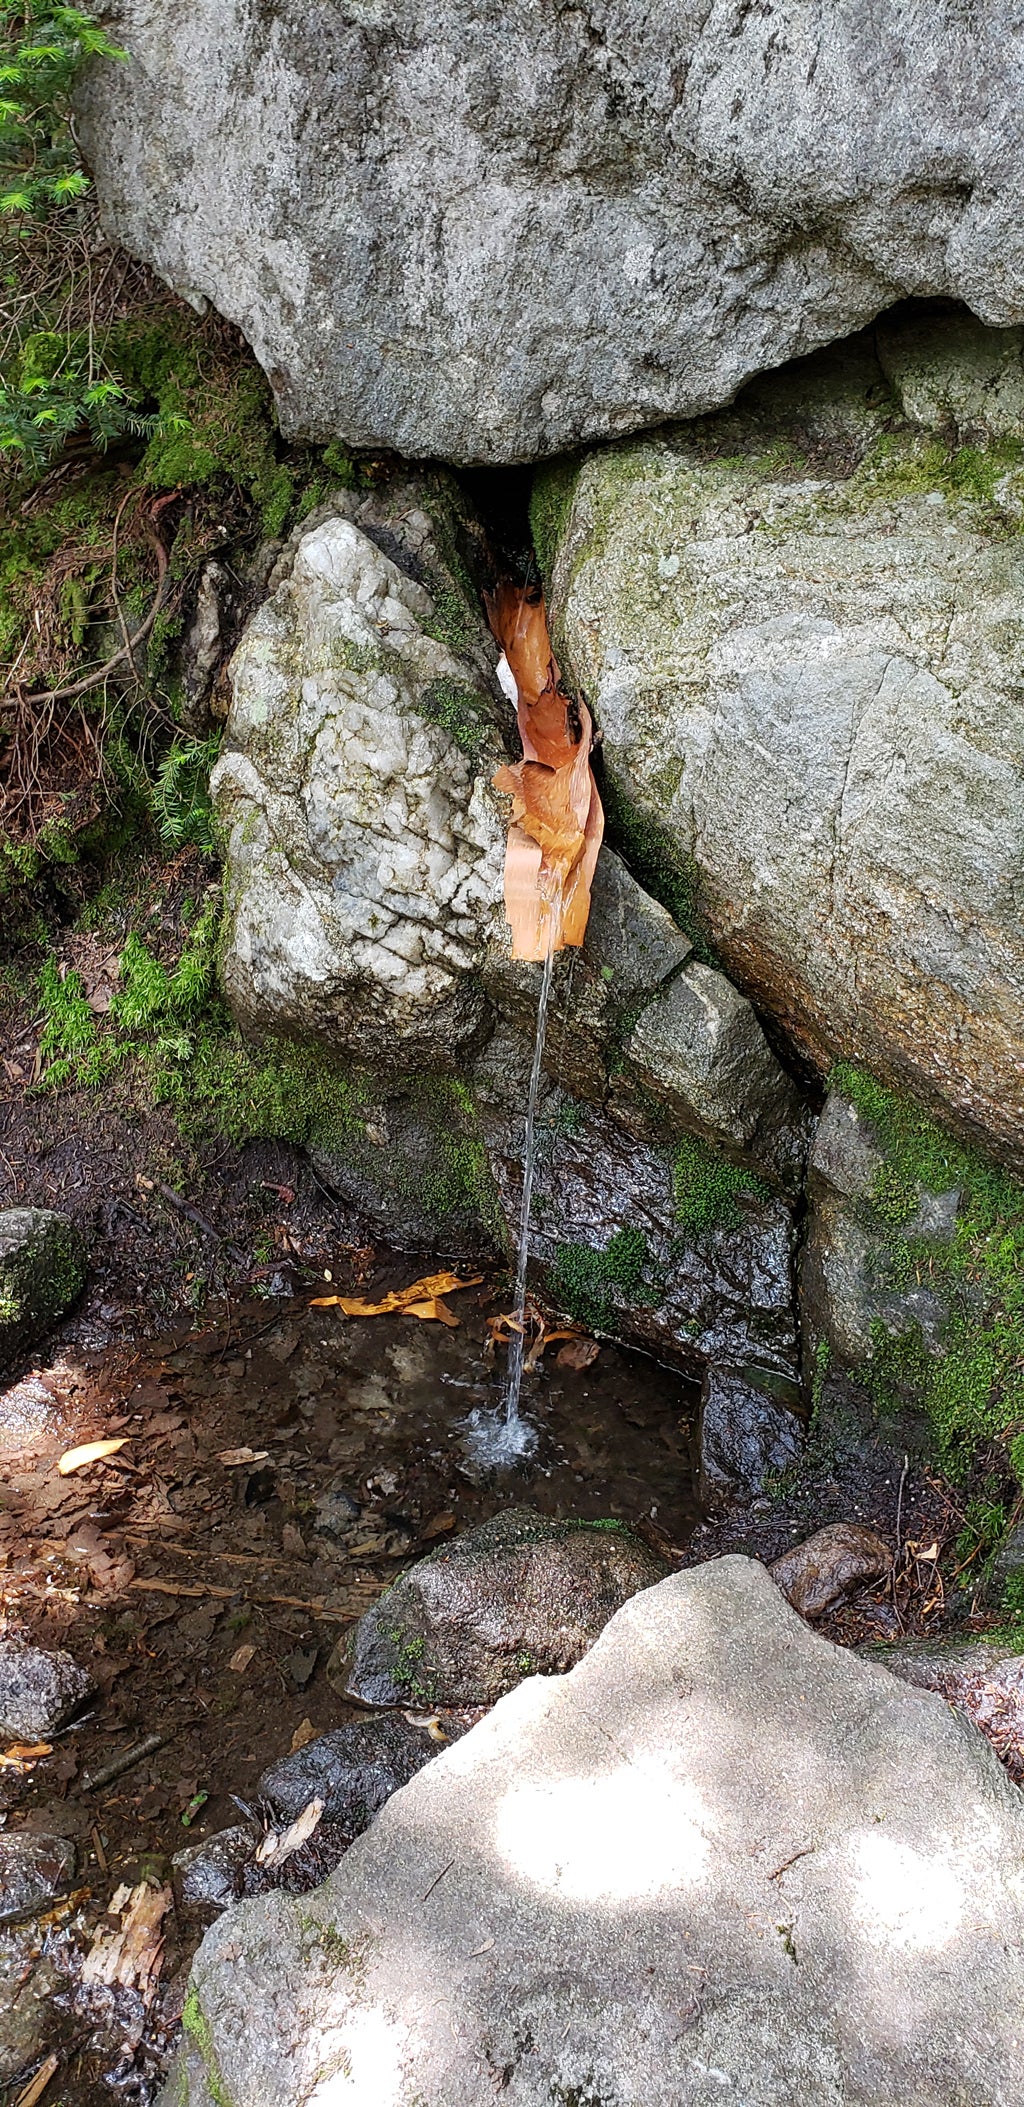 Spring; someone has added birch bark to make a spout to facilitate filling bottles. Remember to filter the water!